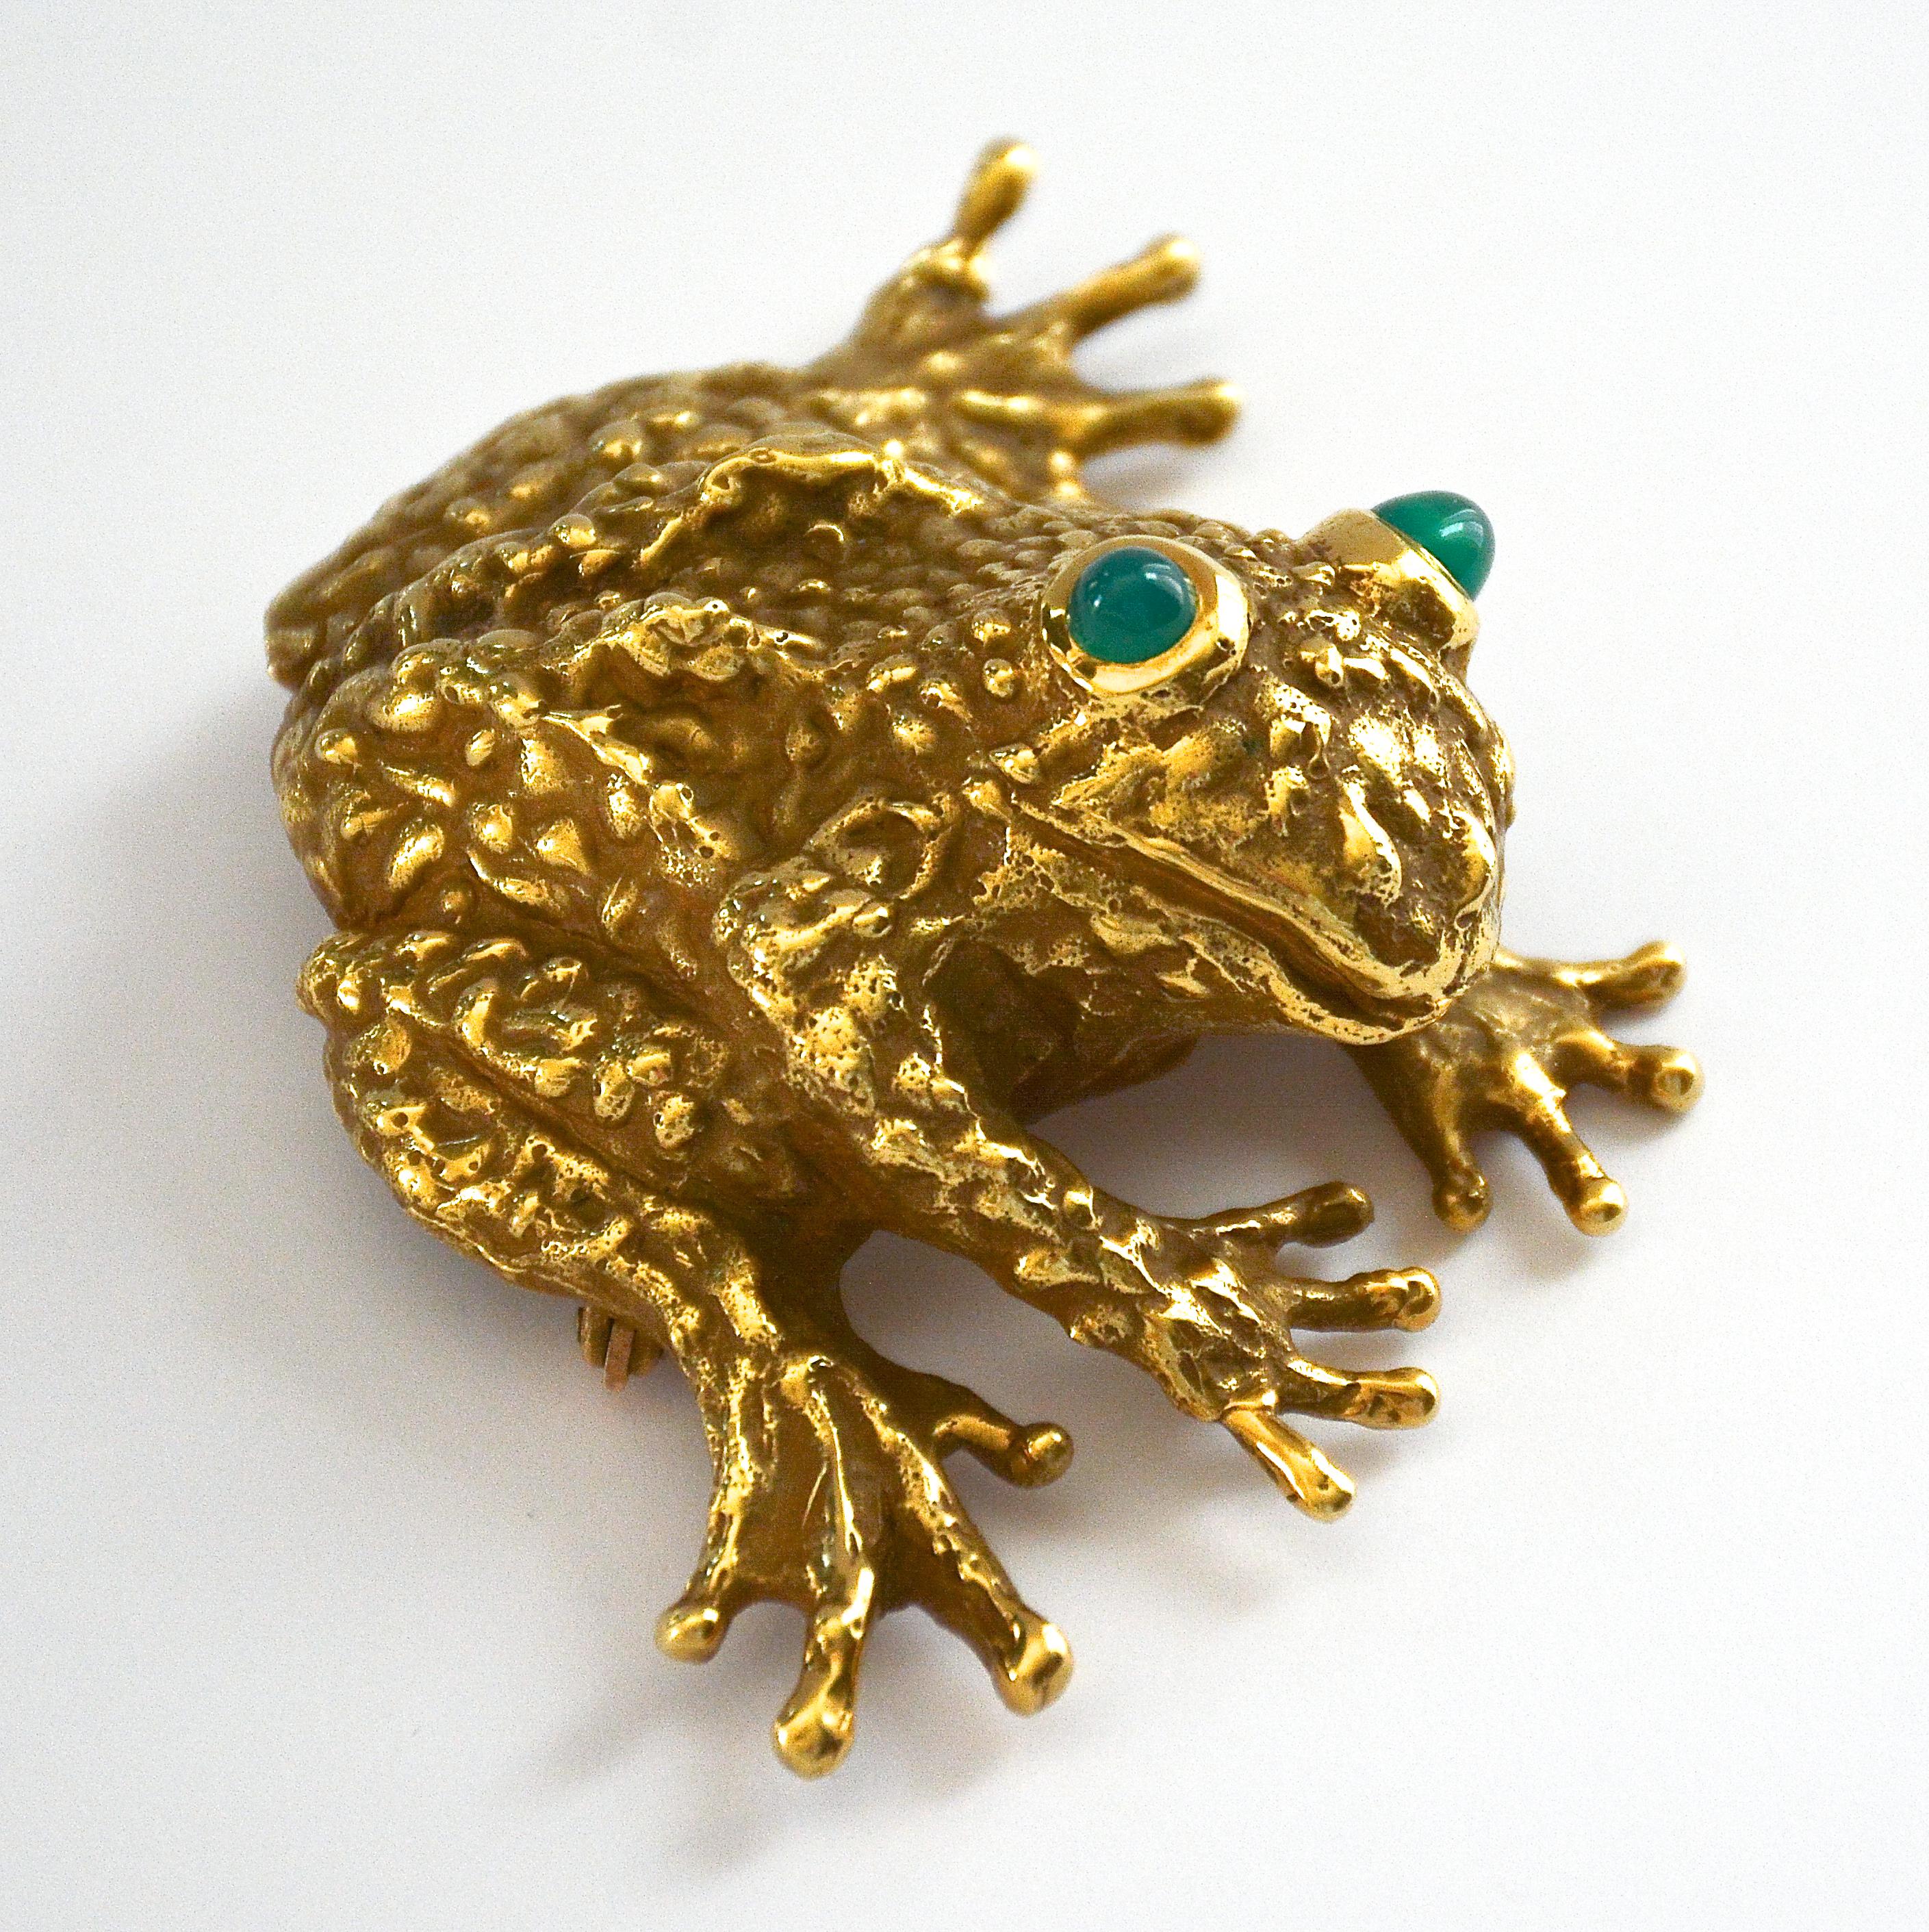 This Erwin Pearl designed 18k. Frog brooch is set with cabochon cut chrysoprase eyes.

 The reverse features a pin stem with C clasp, in 18kt, signed E. Pearl. 

Gross weight is 66.60 grams and measures 2.75 inches W. x 2 13 inches L. x .75 inches